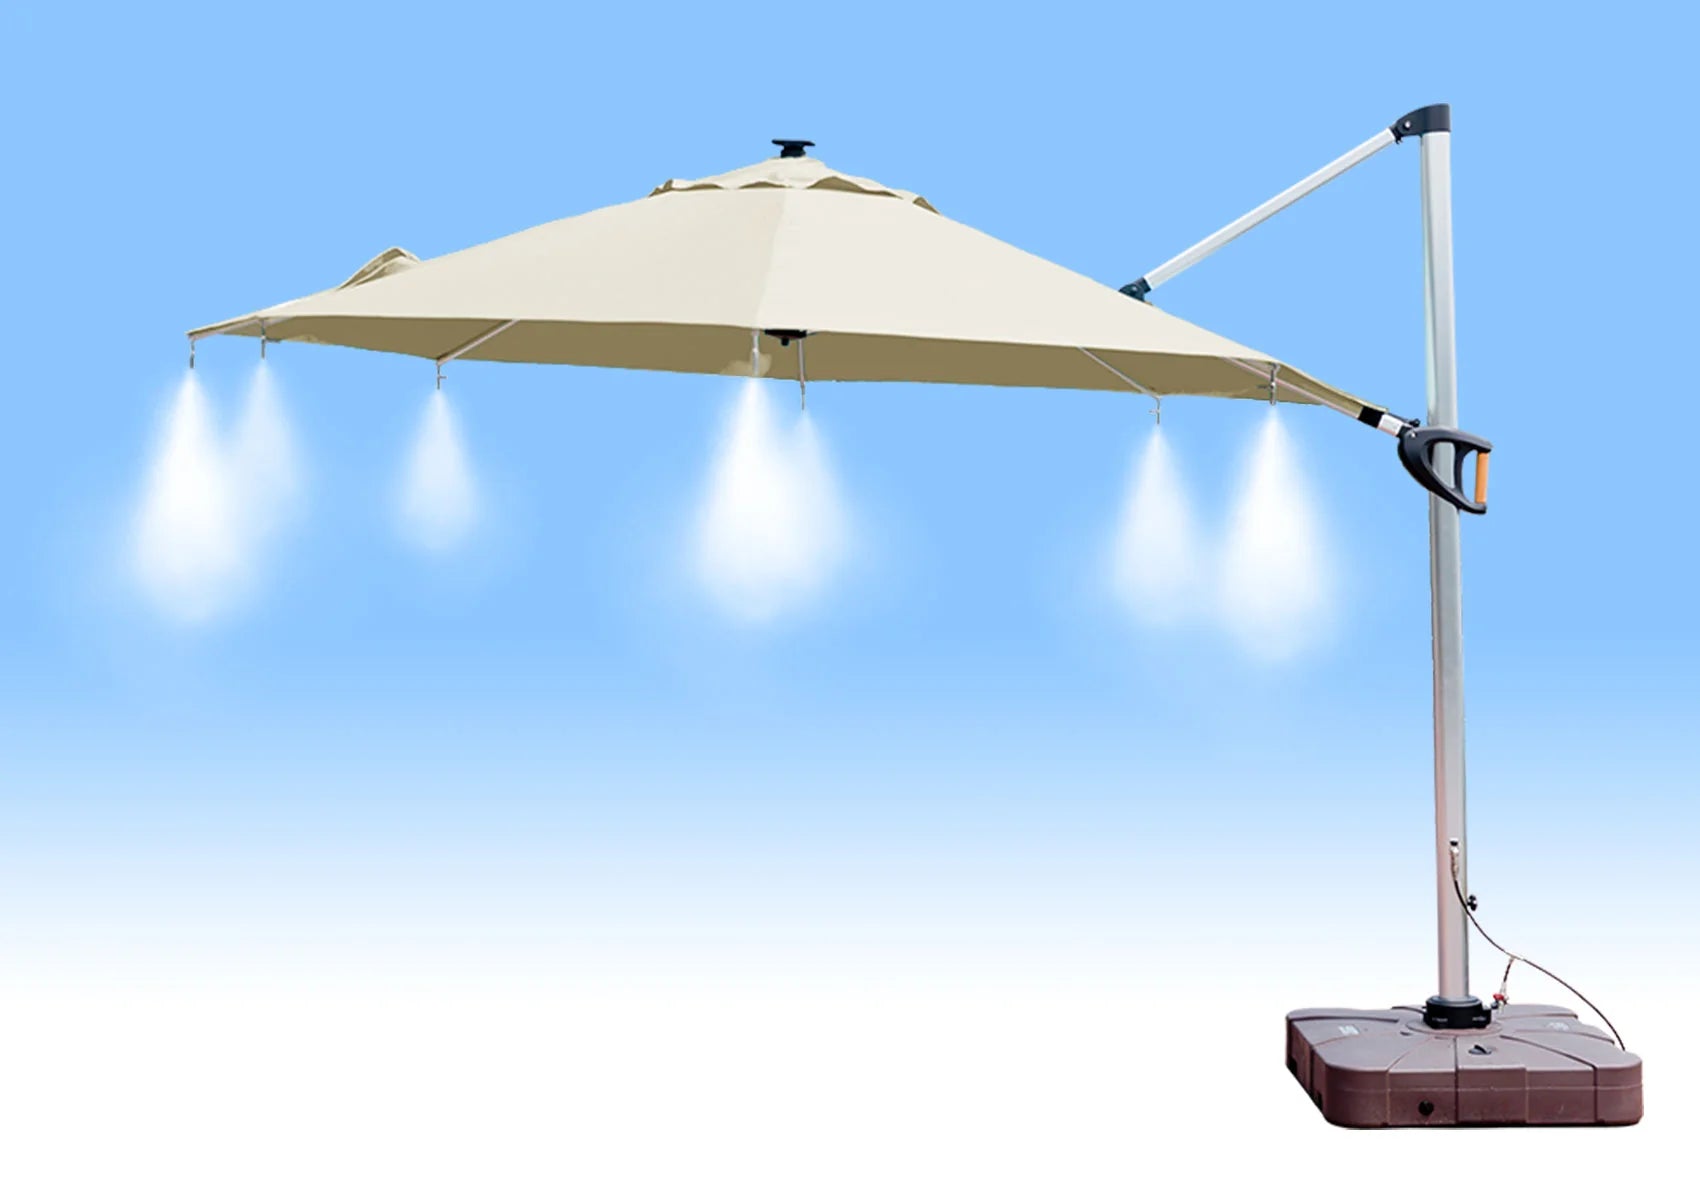 ExtremeMist 14 Nozzle High-Pressure Misting Umbrella with Pump and Stand